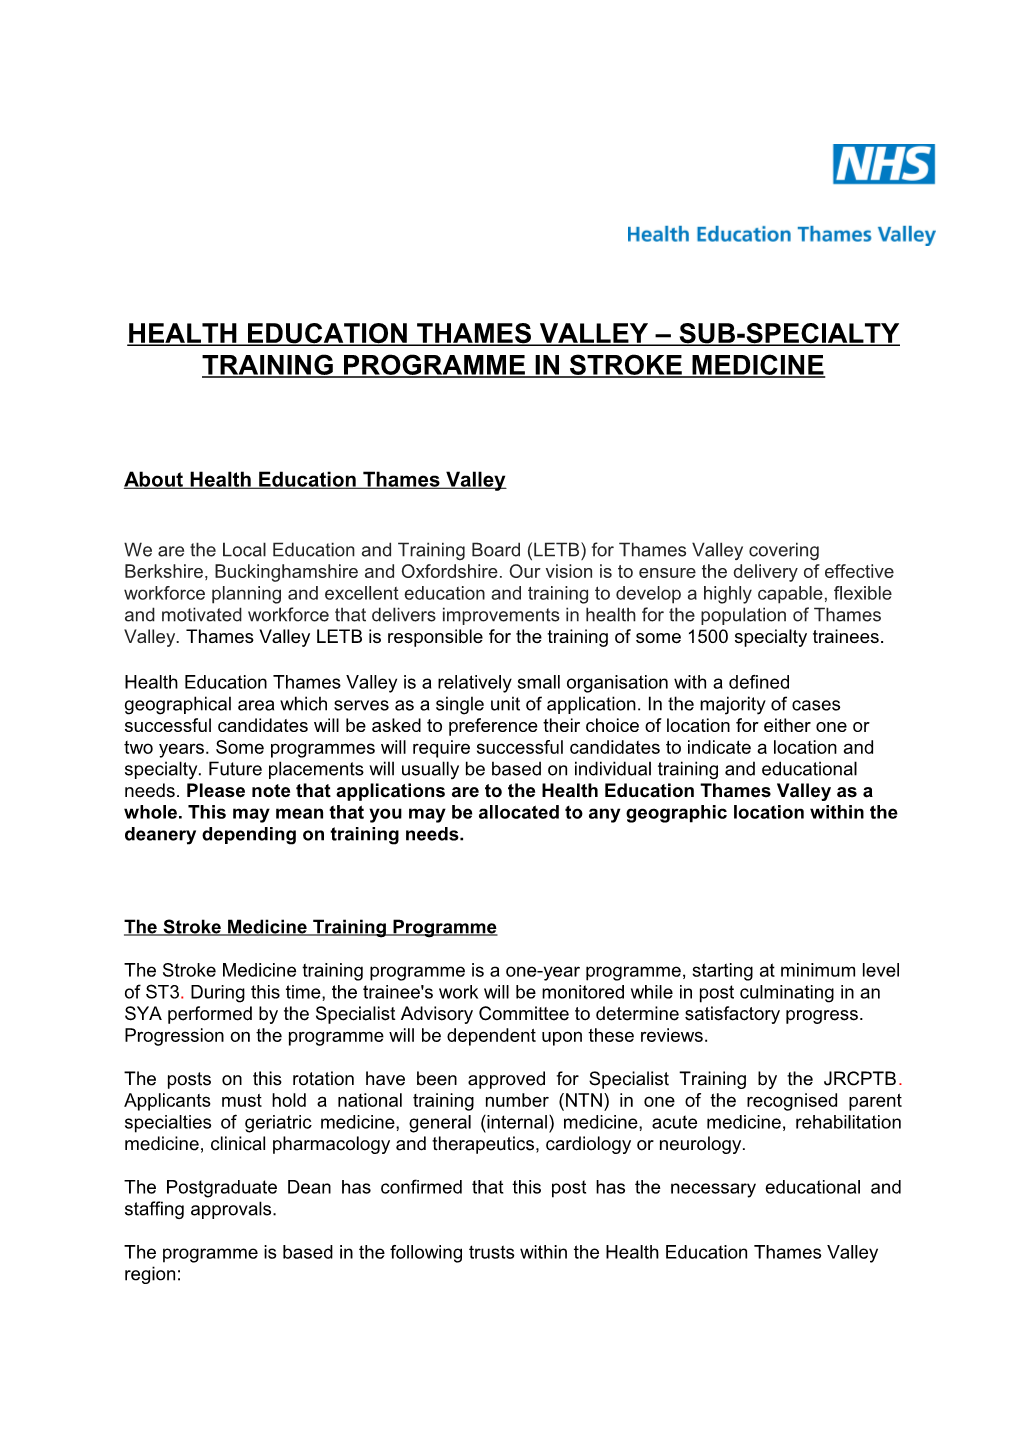 Health Education Thames Valley Sub-Specialty Training Programme in Stroke Medicine